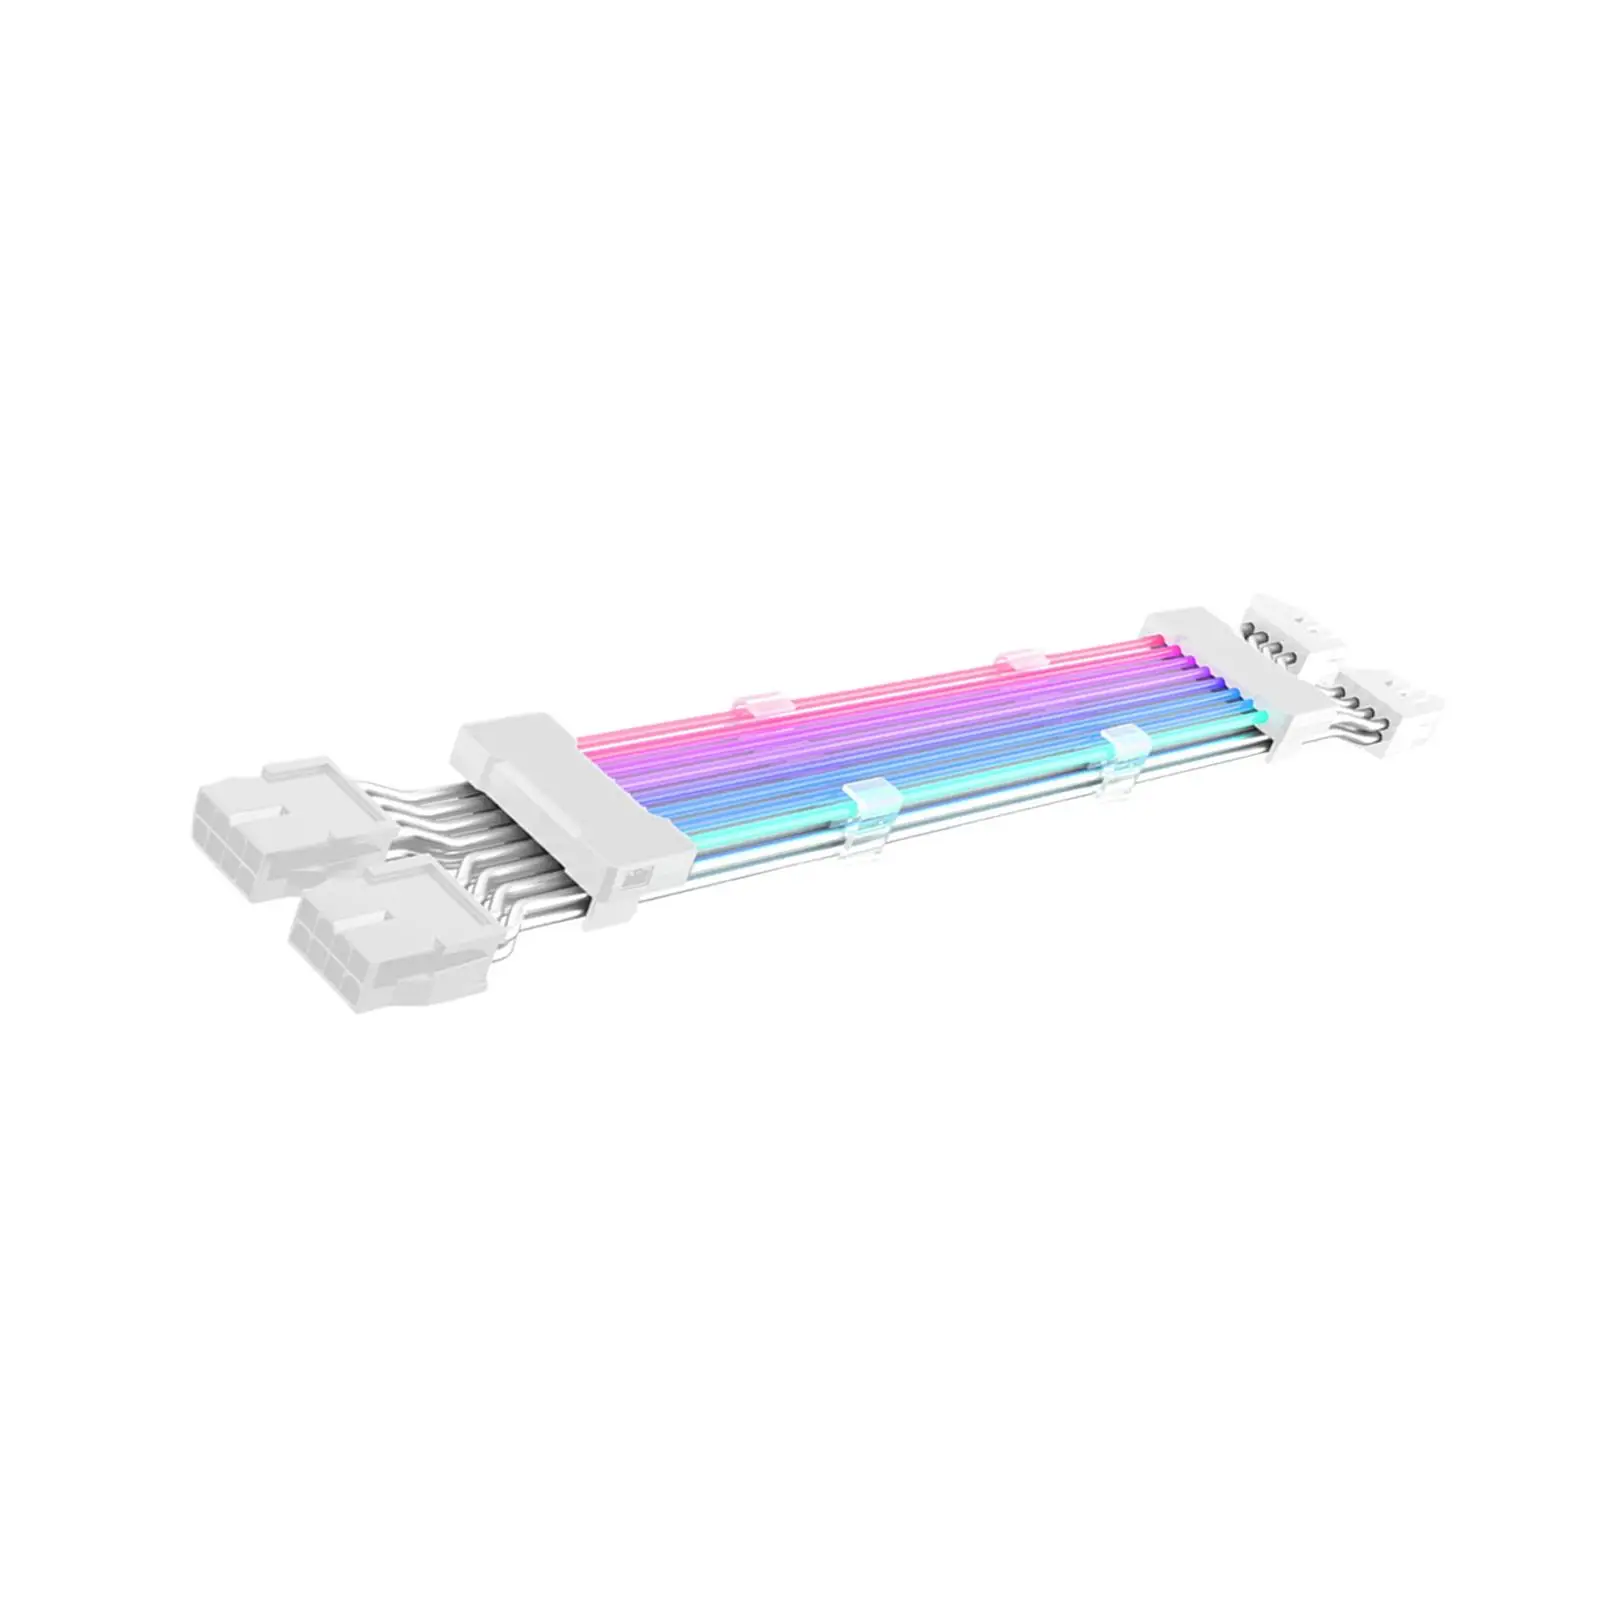 Extension RGB Cable 8 Pin RGB Cable PCIe Cable PSU Connector Adapter for PC Case